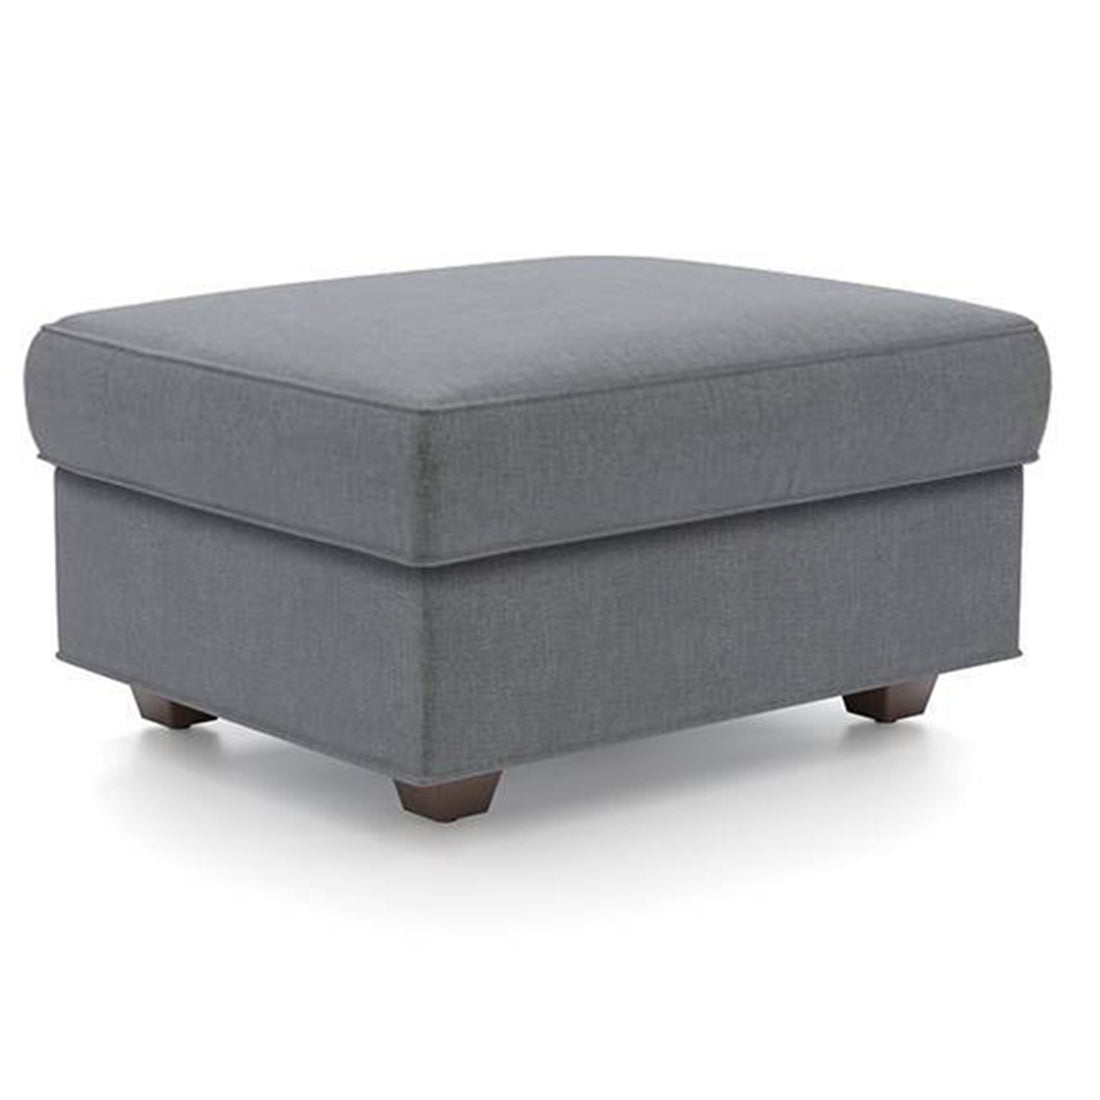 Torque India Rooster 3 Seater Sofa With Ottoman For Living Room - Torque India